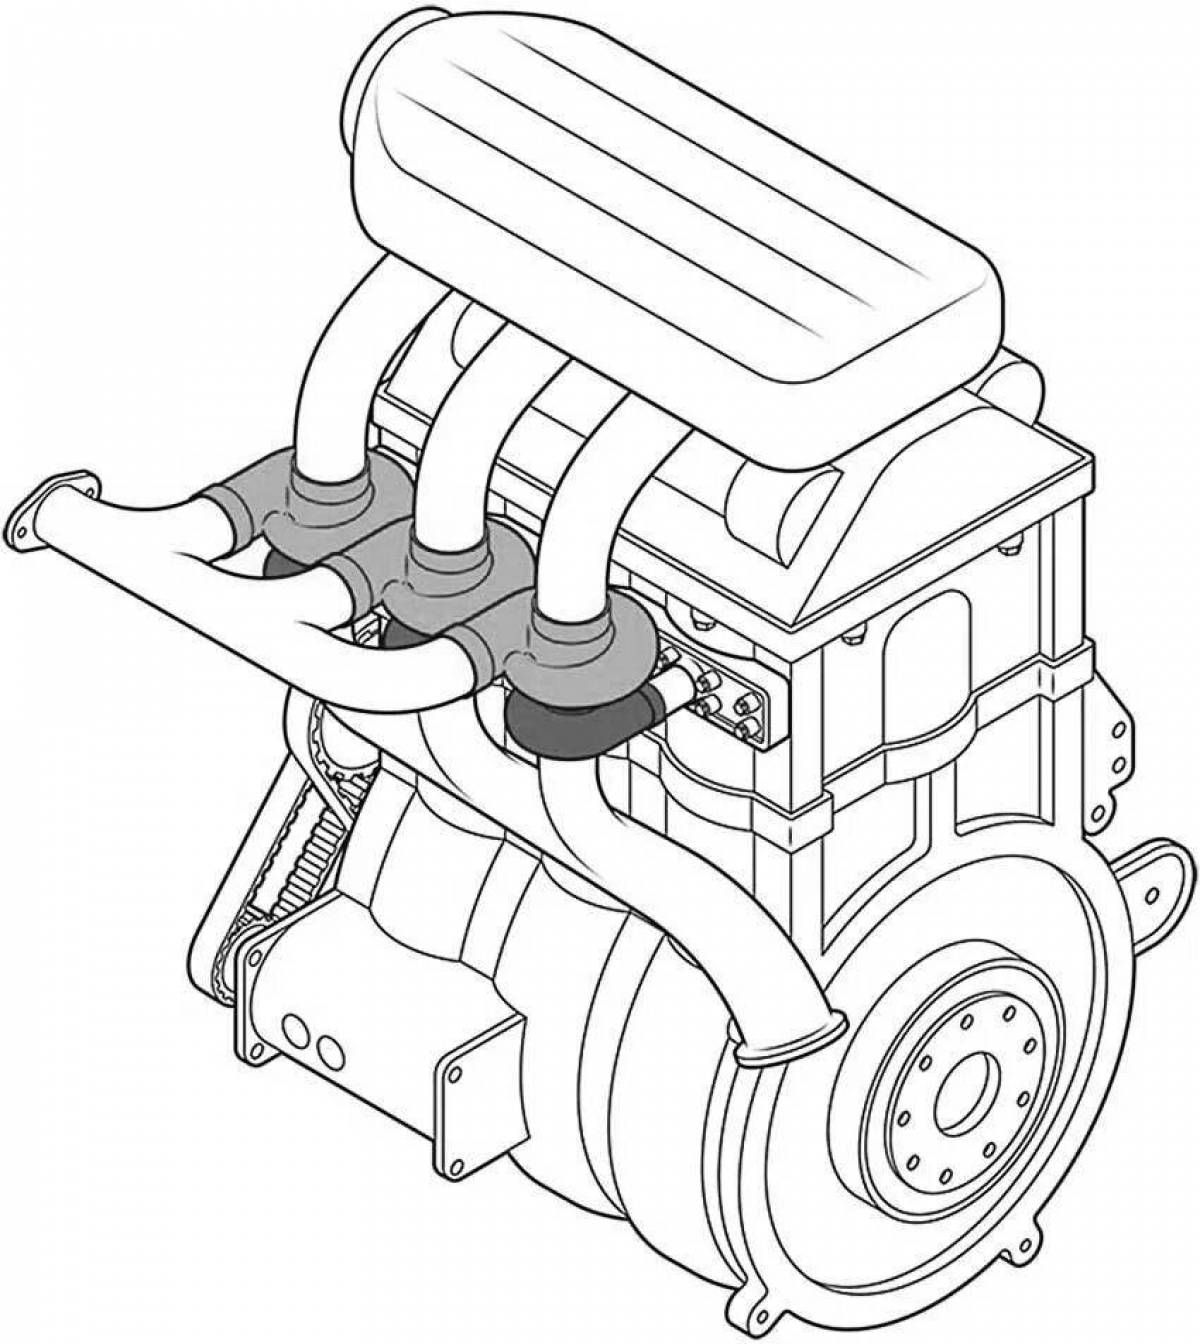 Animated engine coloring page